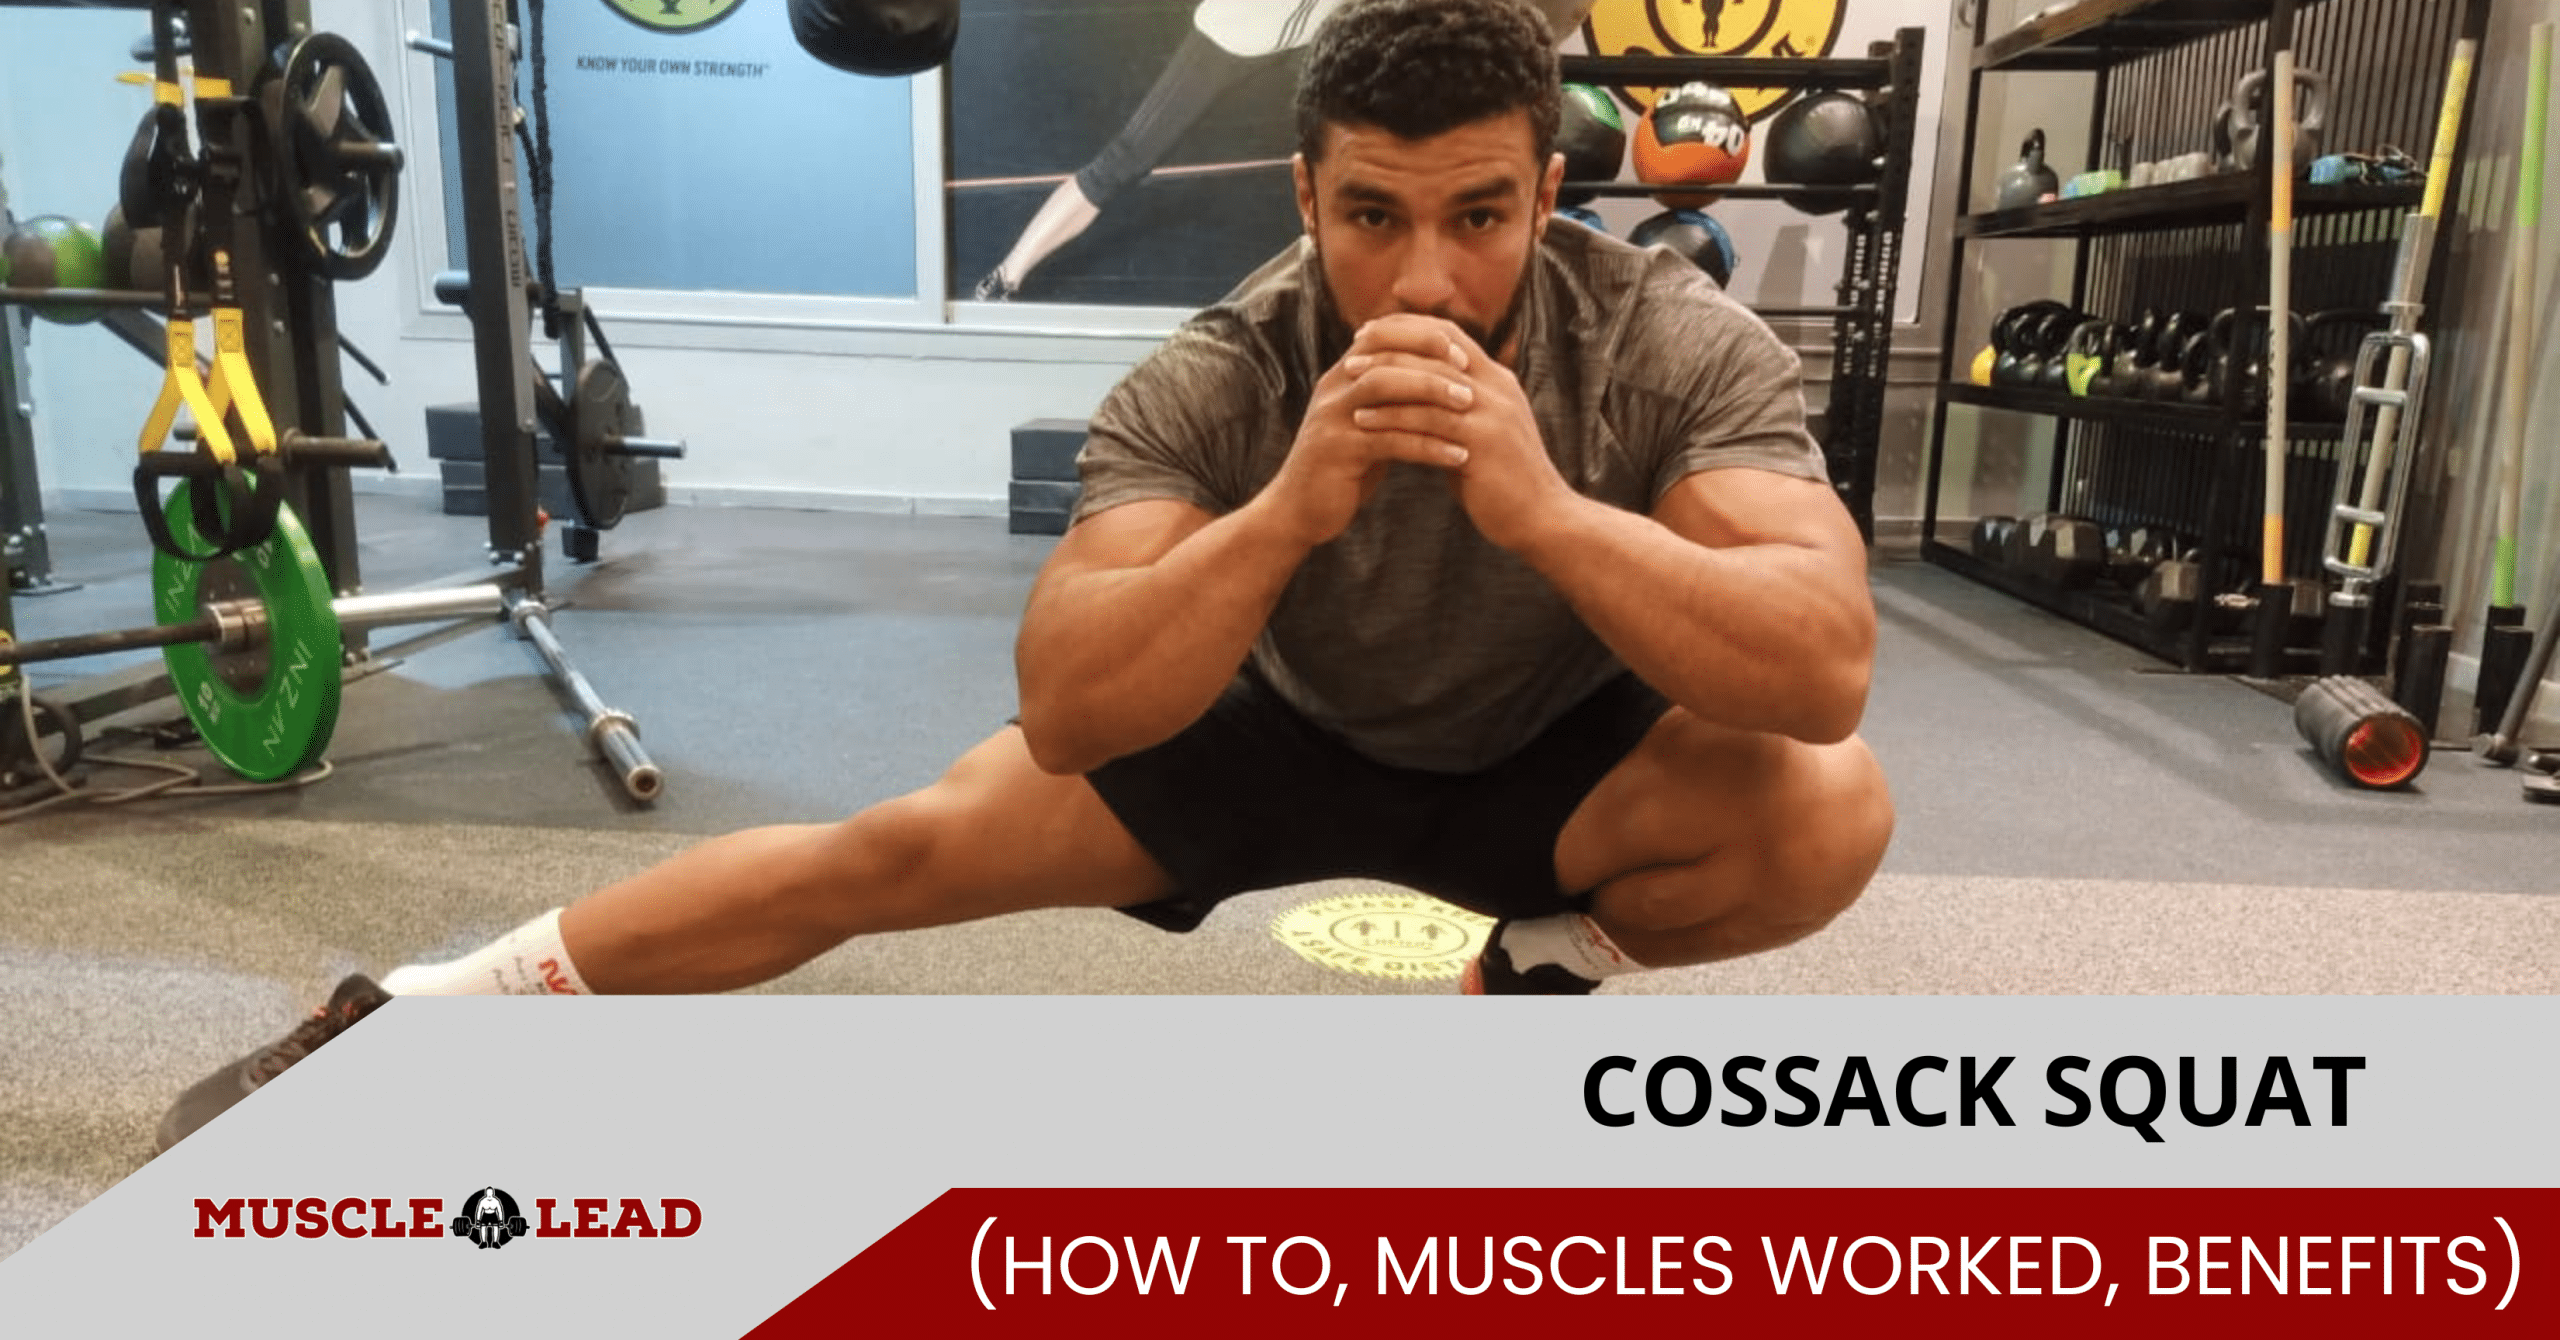 Cossack Squat How to, Muscles Worked, Benefits